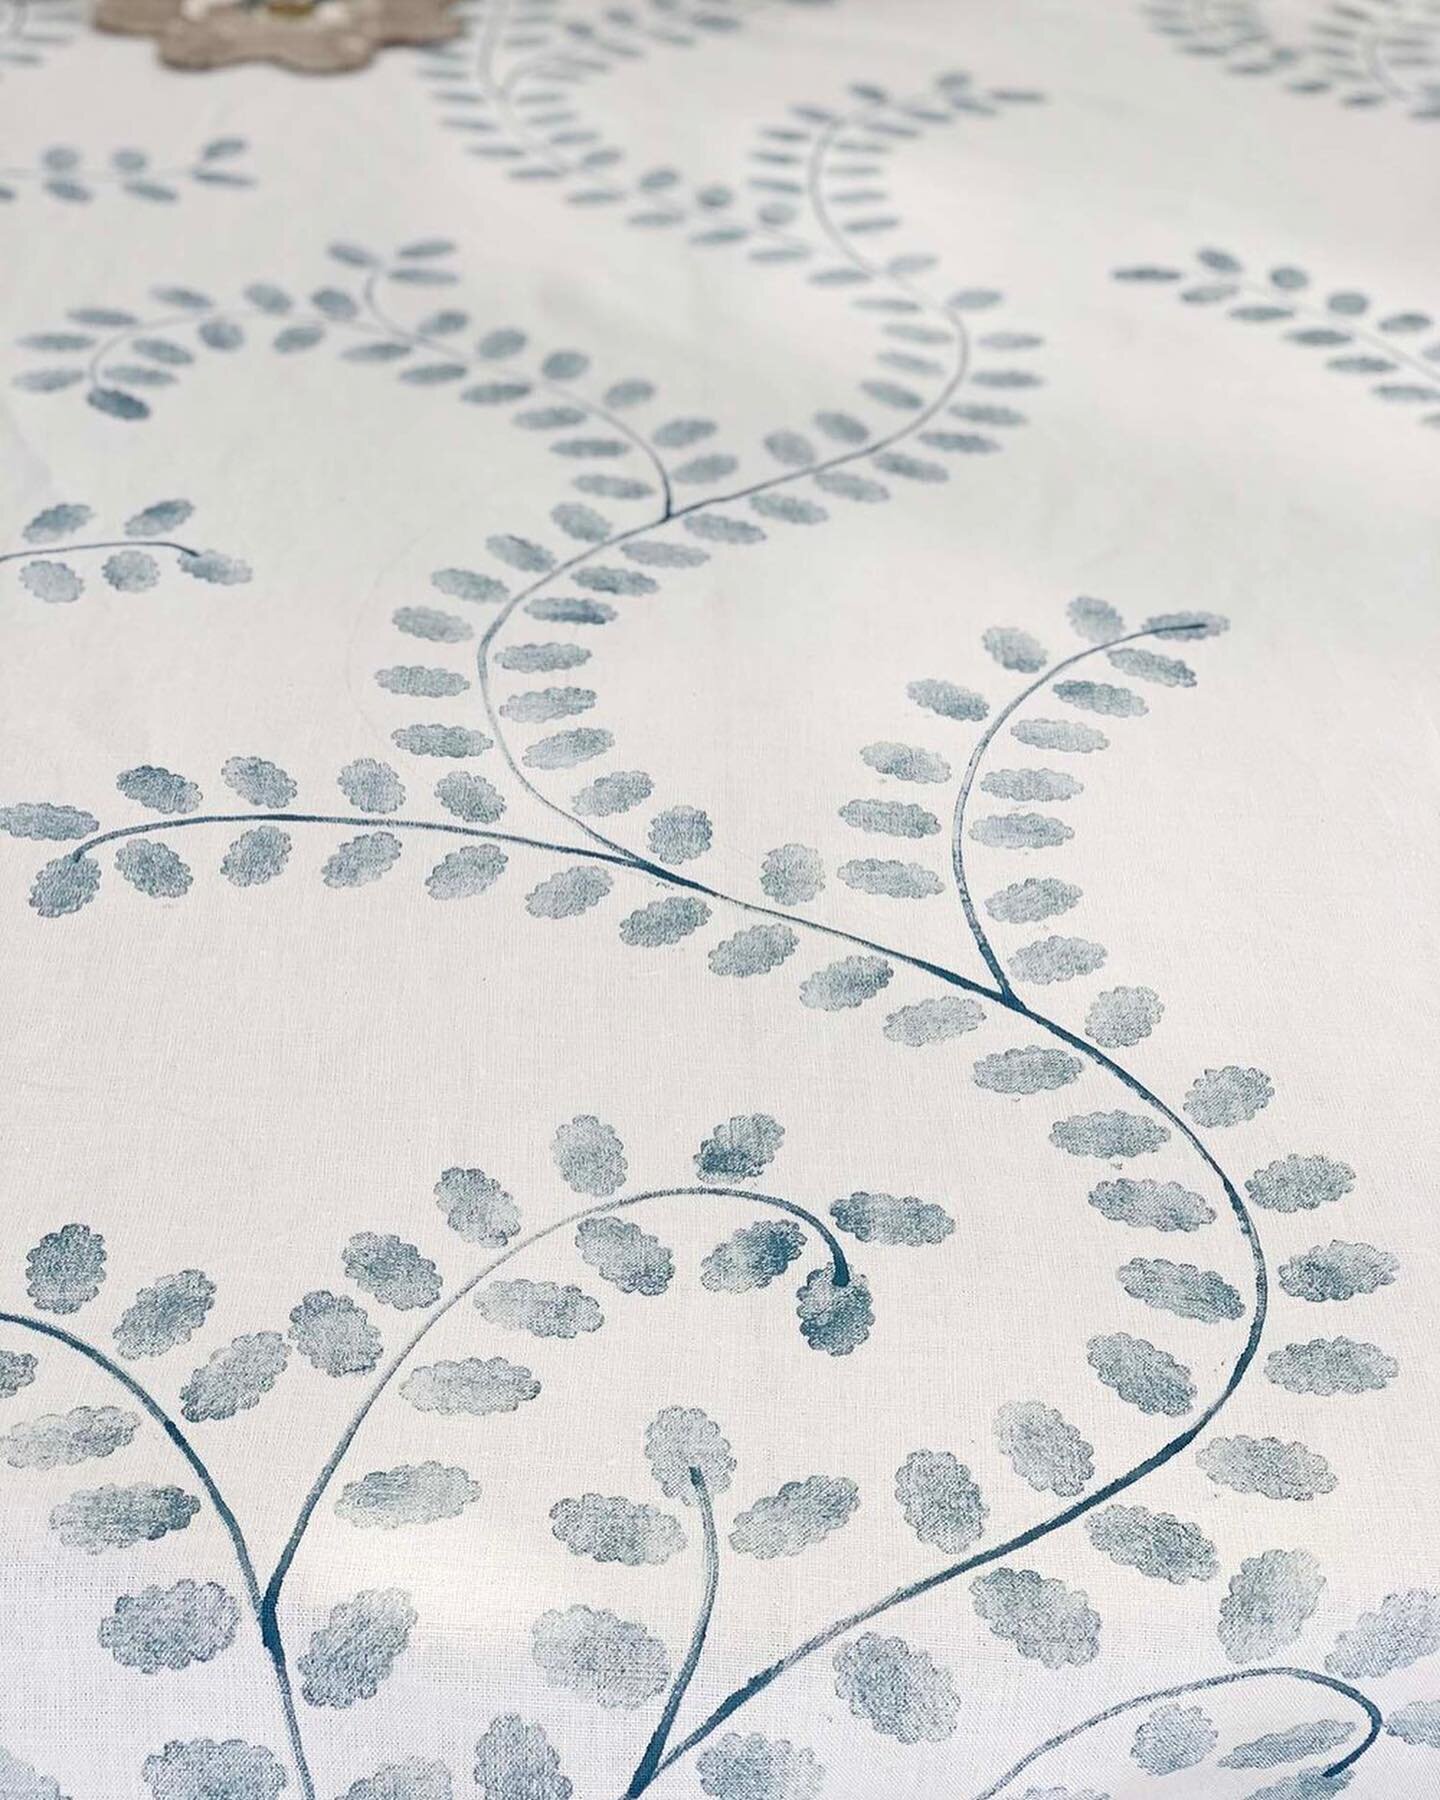 &bull;&bull;&bull; REPURPOSED &bull;&bull;&bull;

Free hand block print in the Vine Print design created using handmade water based inks in ocean blue. 

A sourced vintage Irish linen sheet repurposed into a beautiful tablecloth perfect for any occas